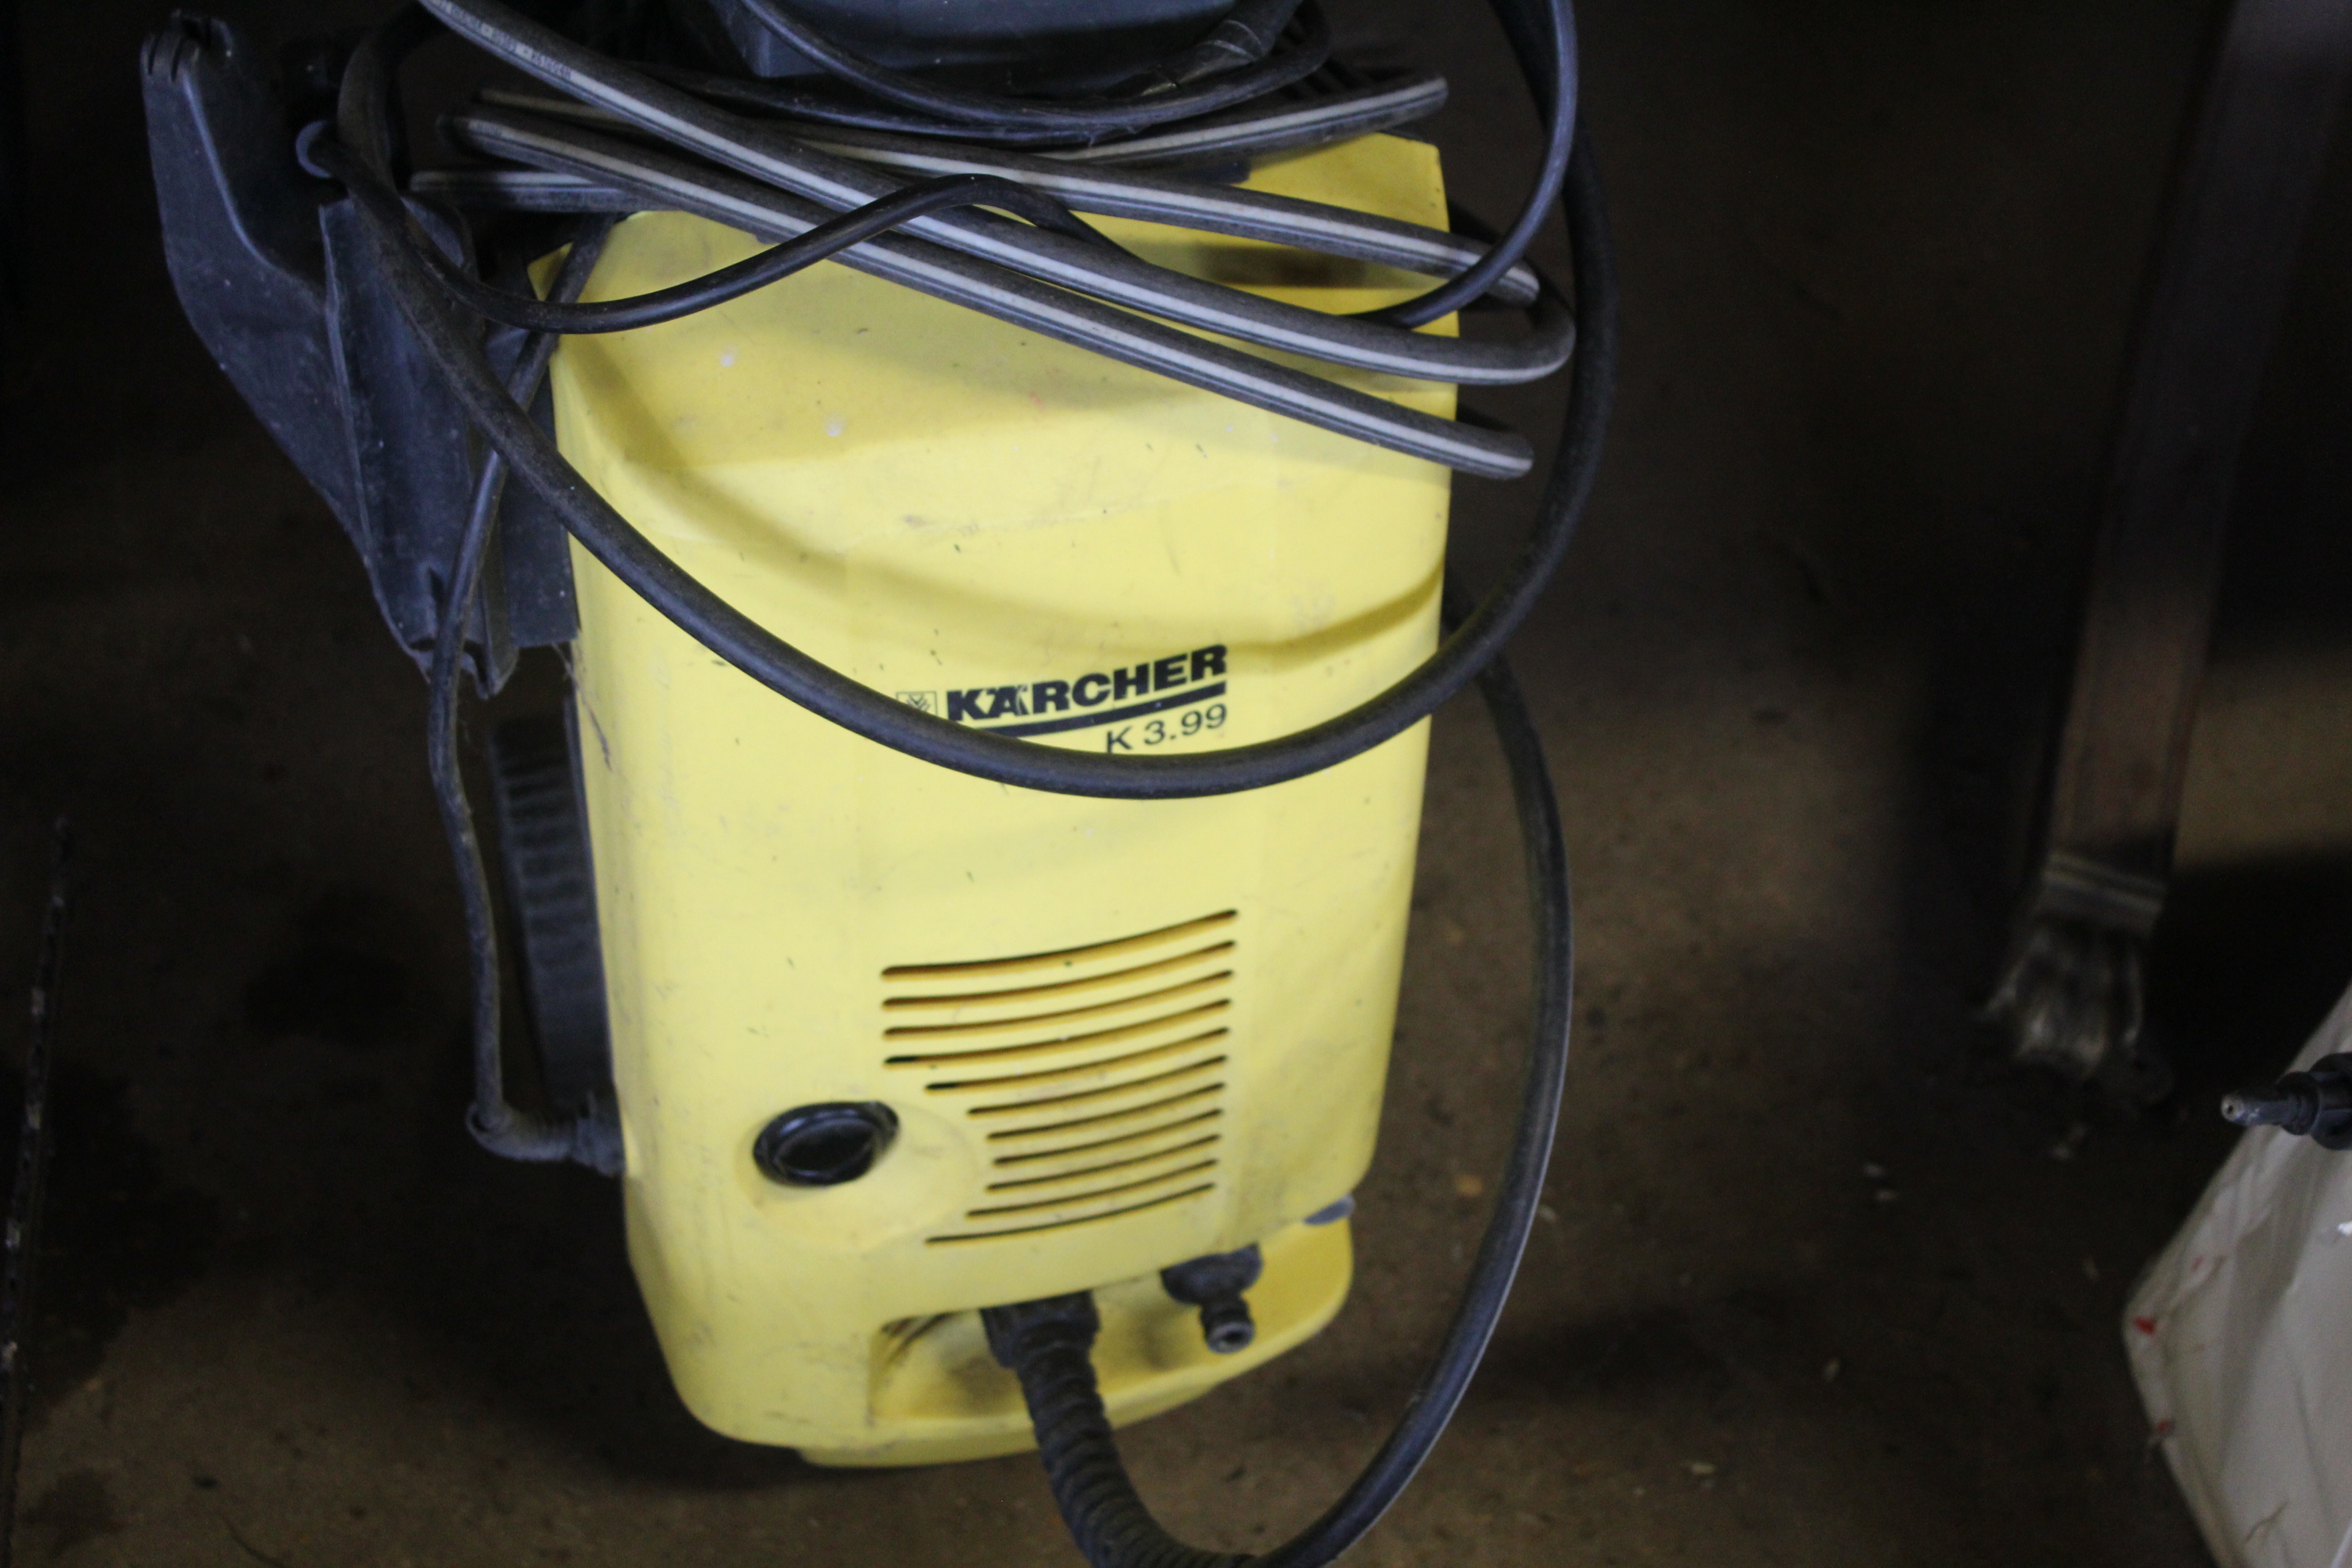 A Karcher K3.99 electric pressure washer with lanc - Image 3 of 3